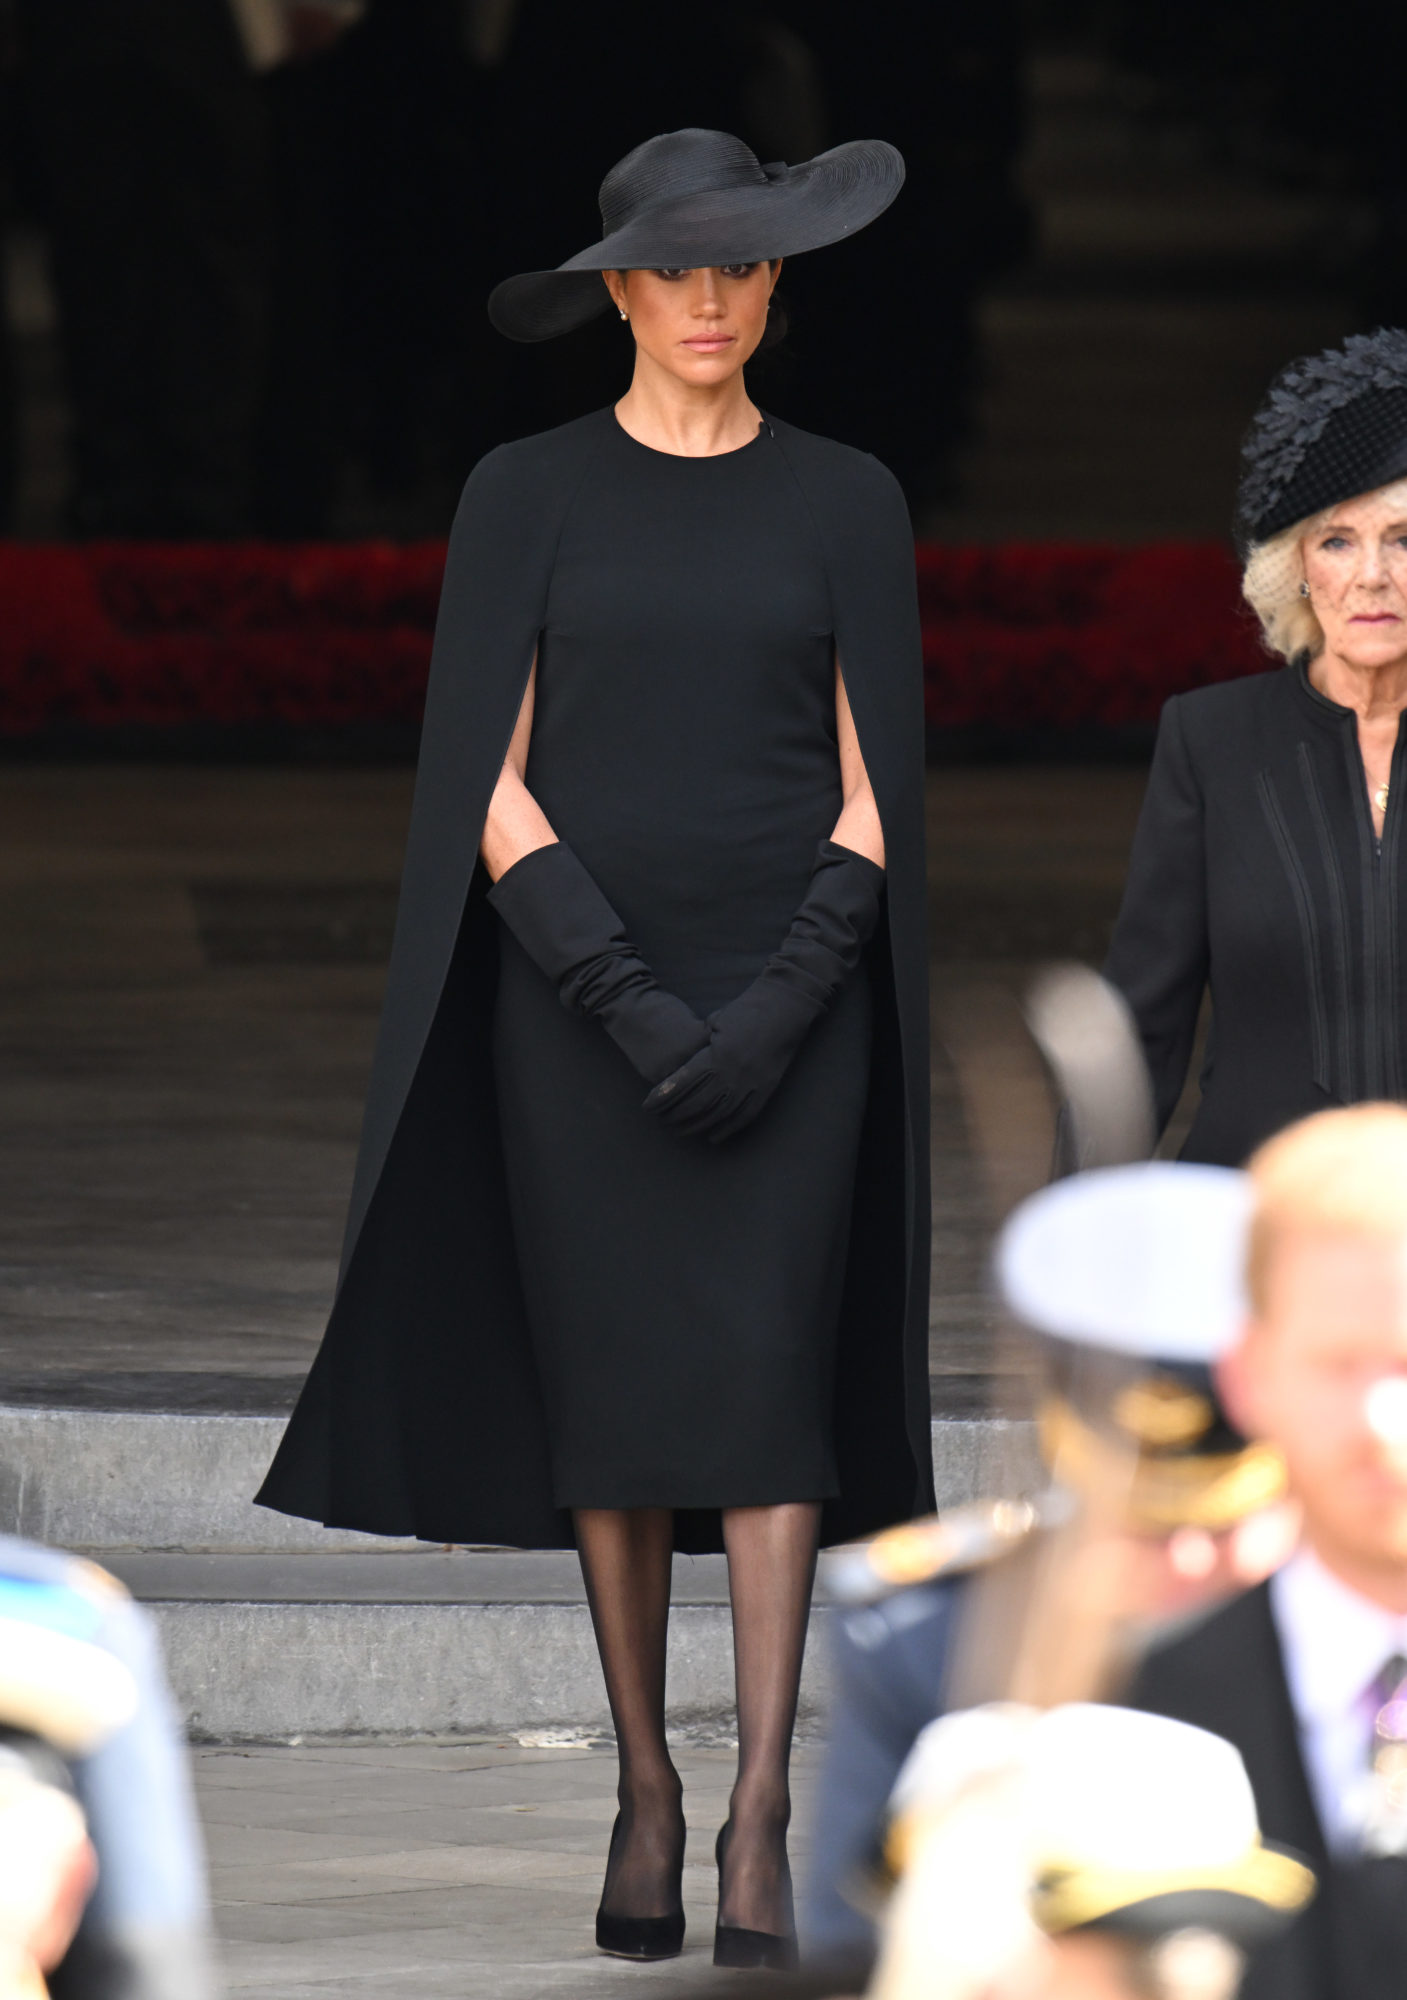 Meghan Markle's Funeral Outfit Pays Tribute to the Queen